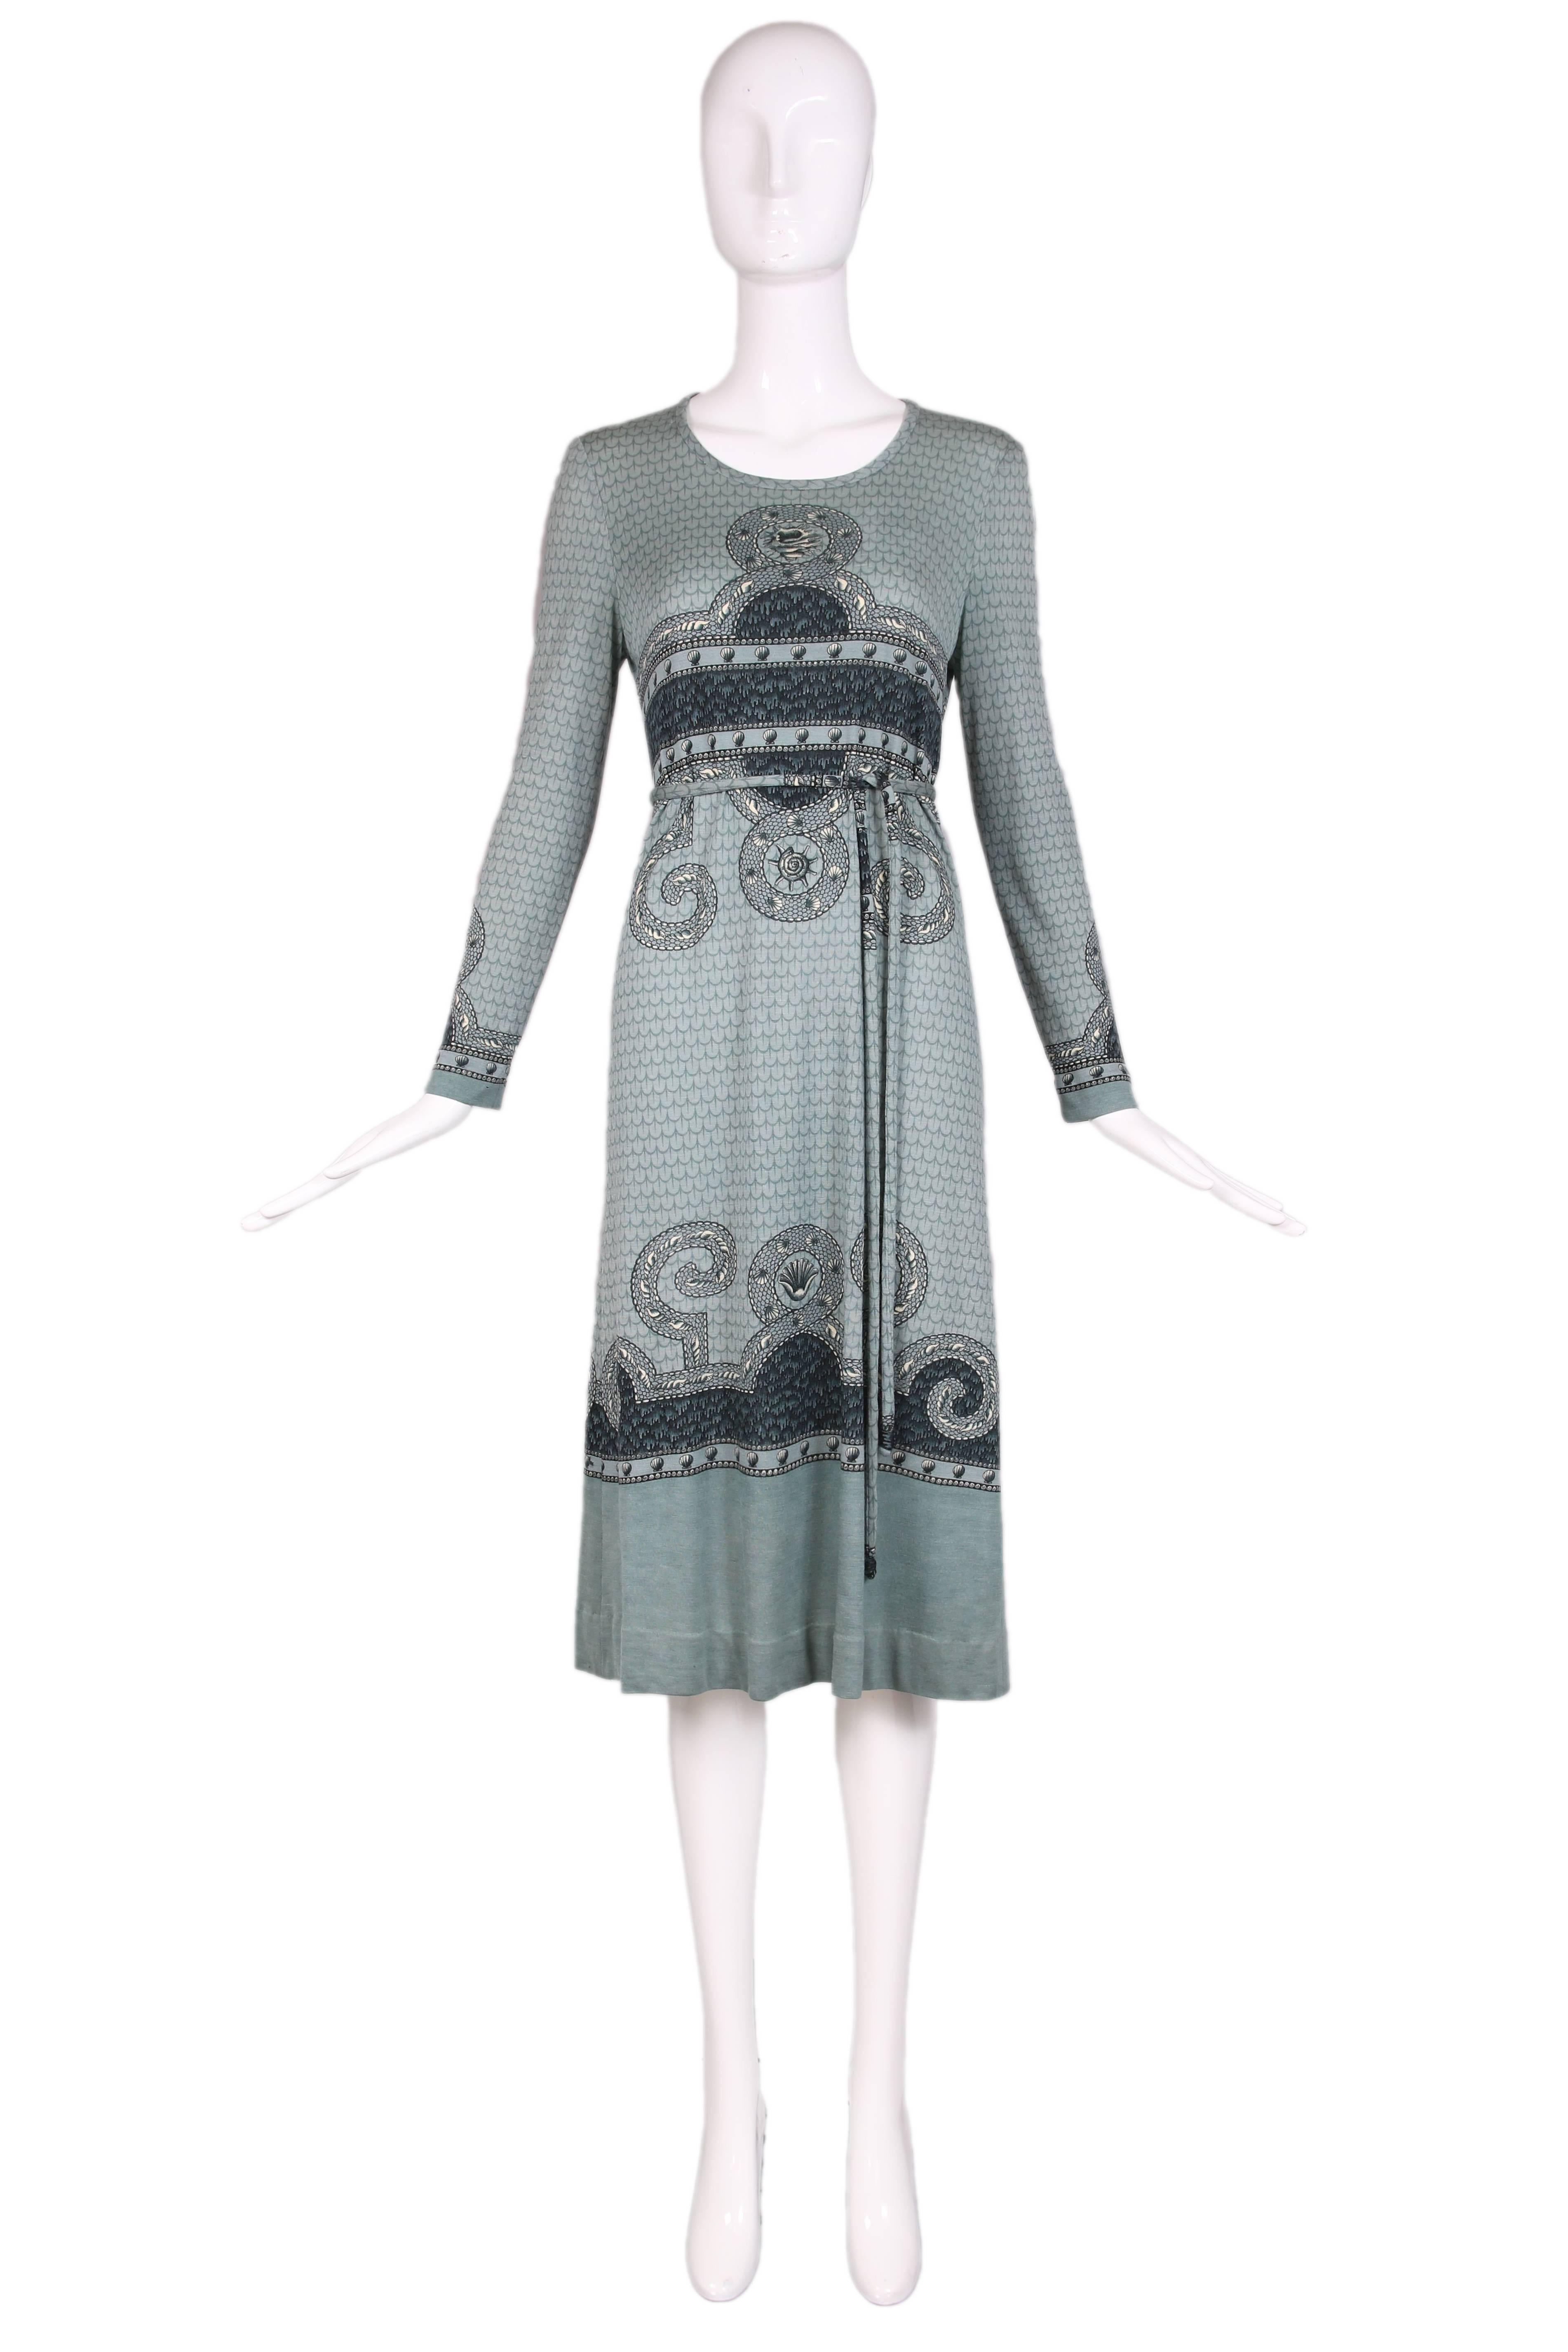 1970's Hermes blue cashmere long sleeved dress with "Rocaille" shell print and matching belt. In excellent condition. No size tag, please consult measurements.
MEASUREMENTS:
Bust - 36"
Waist - 34"
Hip - 40"
Shoulder -